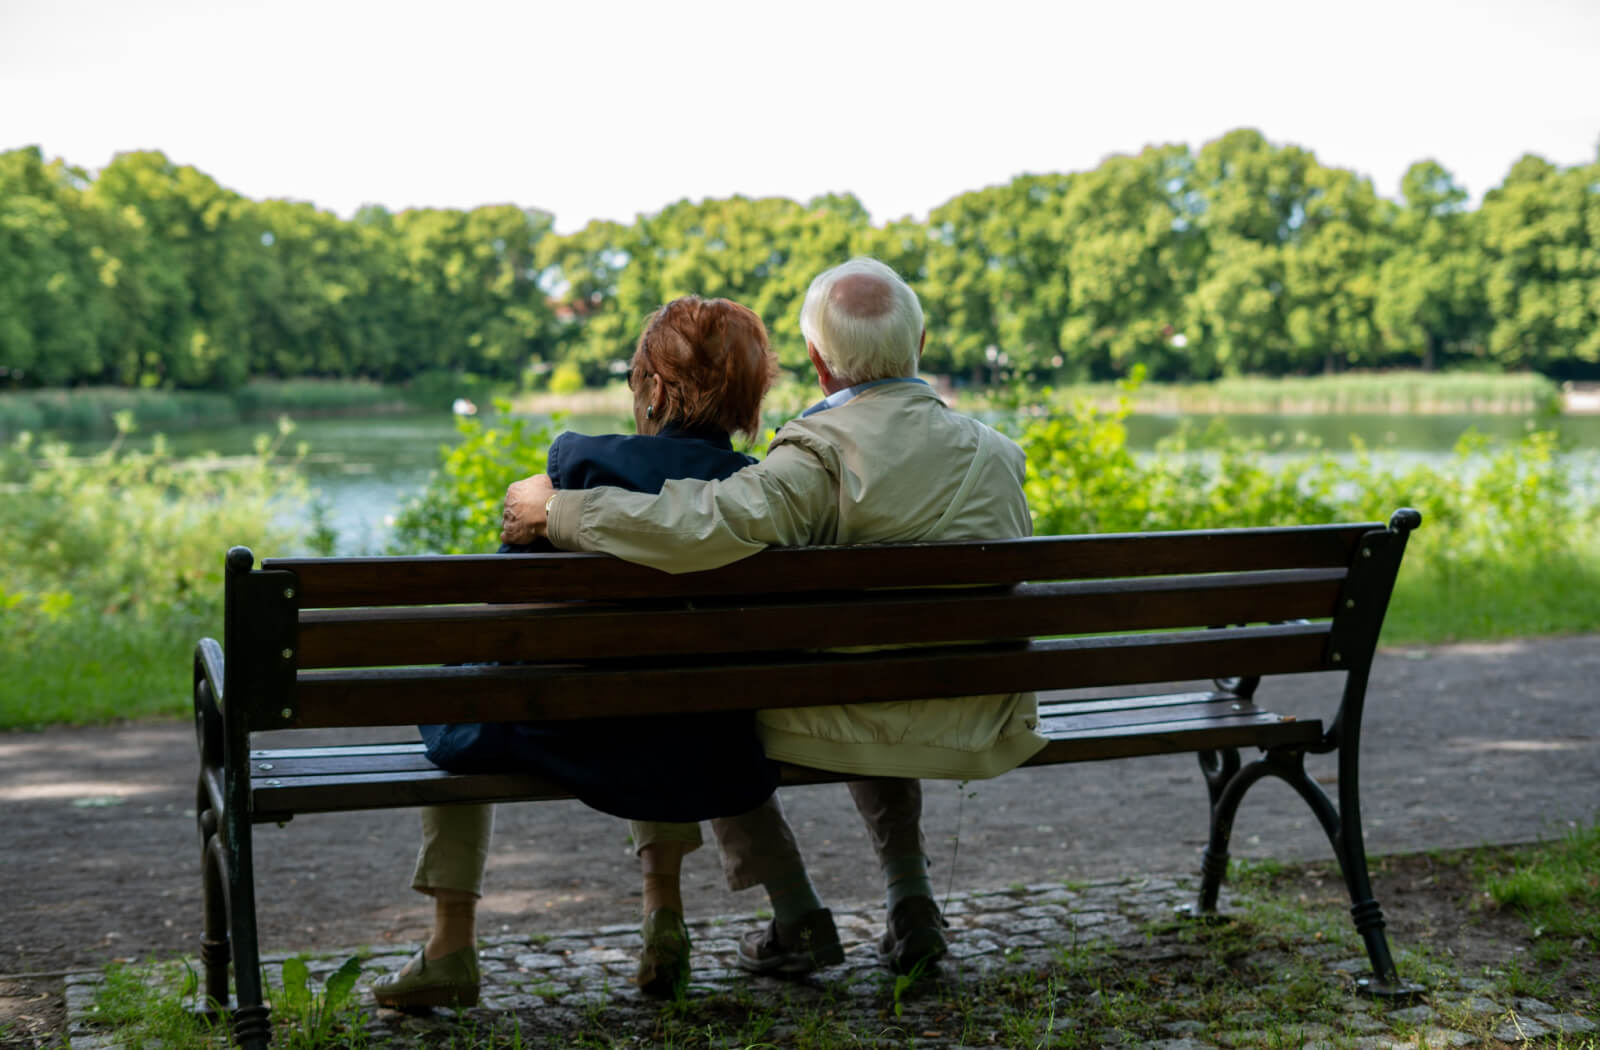 A female senior in a blue jacket and a male senior in a light brown jacket are sitting beside each other on a bench while watching the lake.